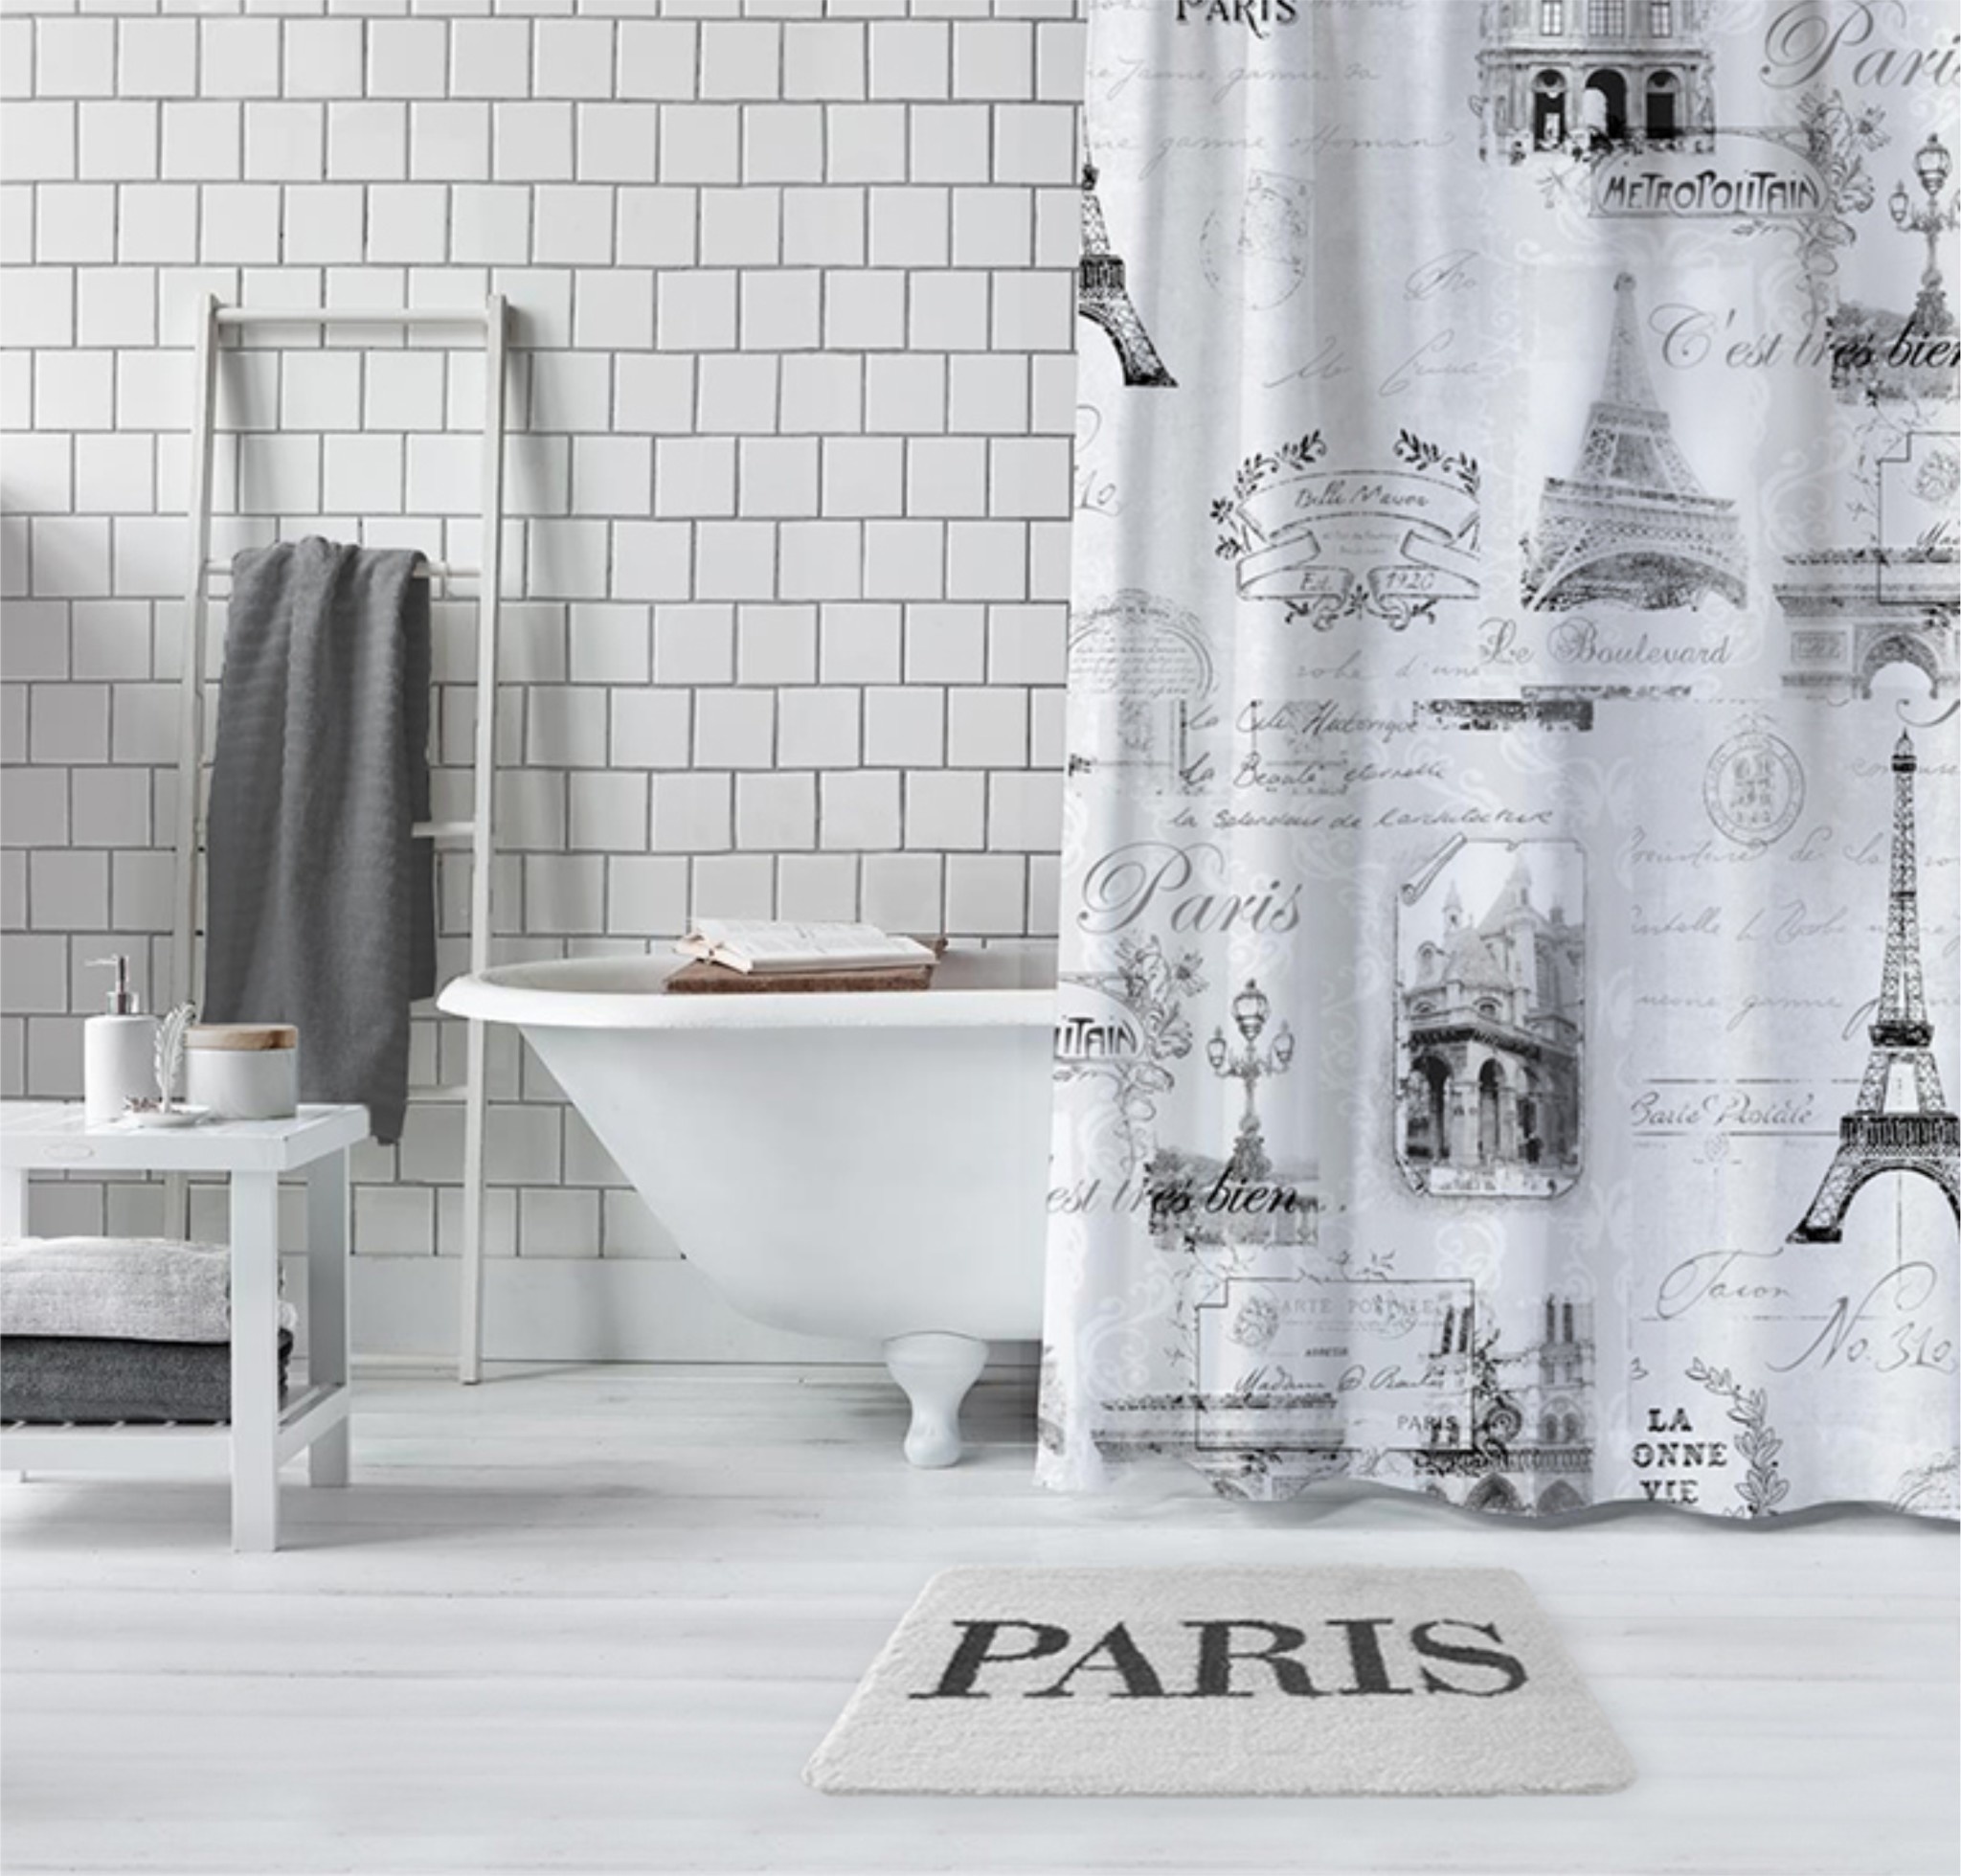 Paris Shower Curtain Mp12 Oxford Mills Home Fashion Factory Outlet And Beddington S Bed Bath